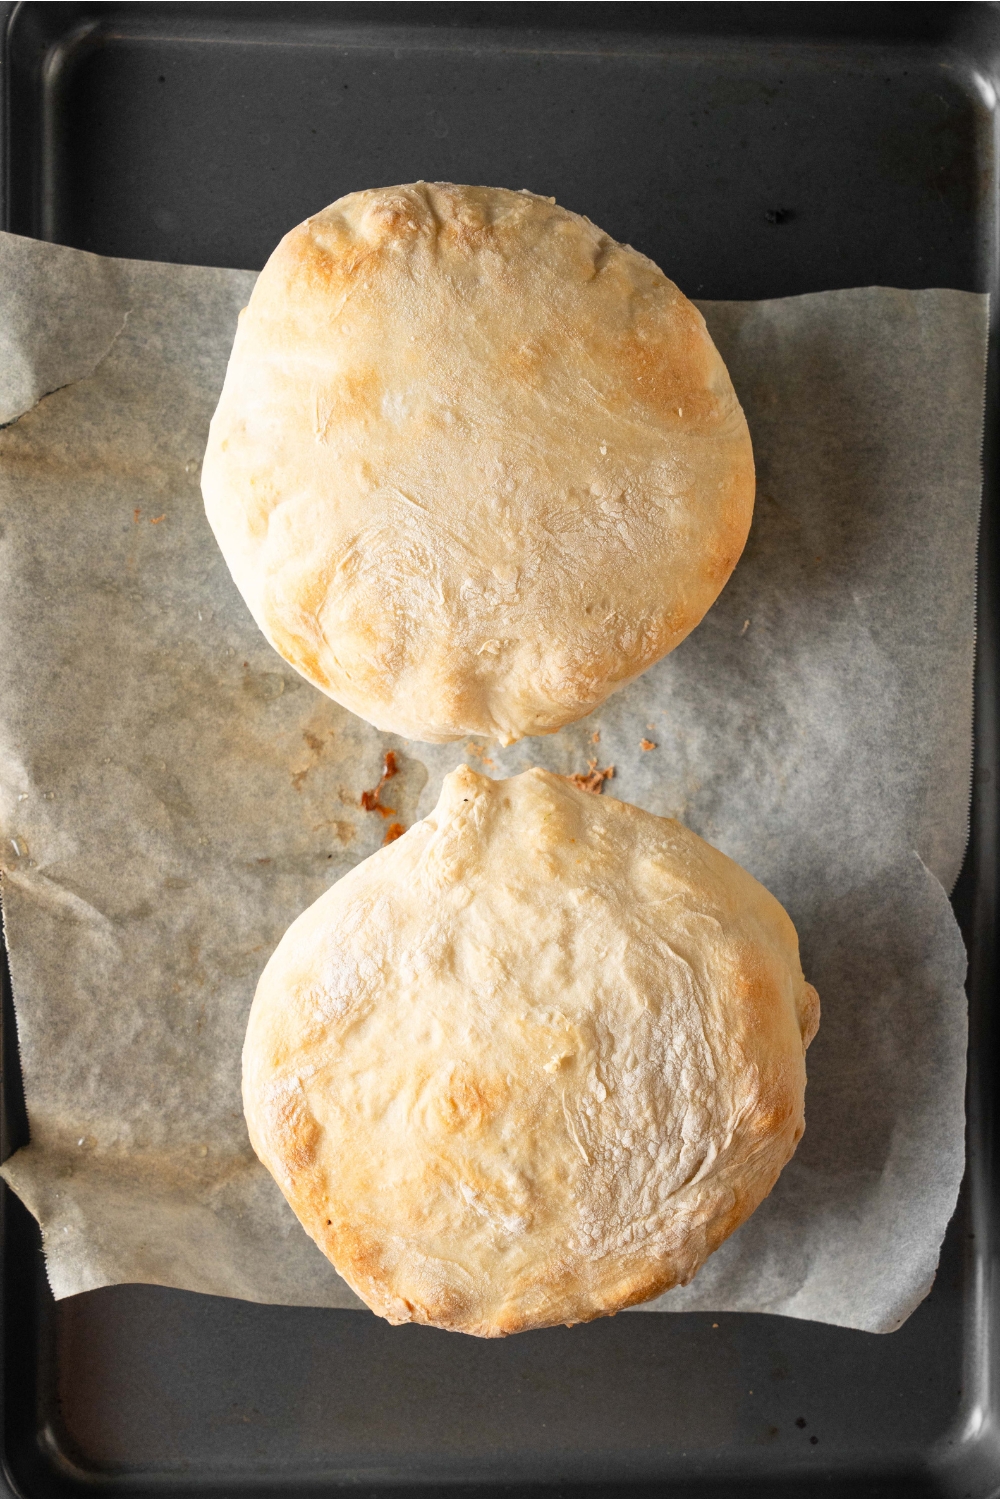 Two baked pot pies are on a baking sheet lined with parchment paper.